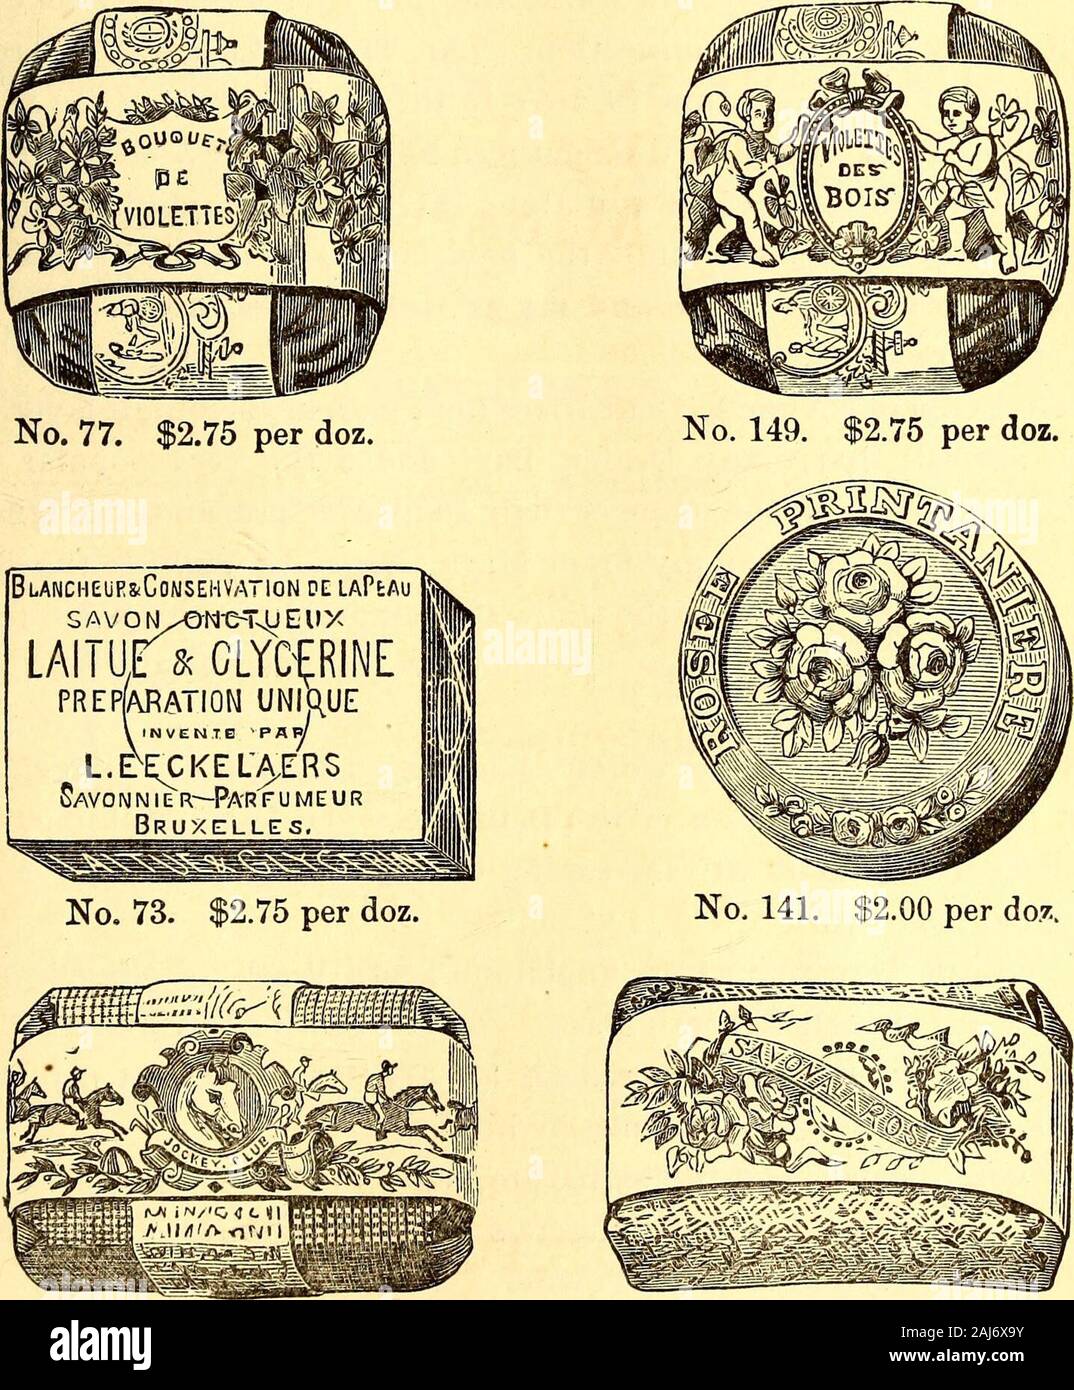 American journal of pharmacy . gees, Elixir and Syrup of Iron,RigoUots Mustard Leaves, DucrosAlimentary Elixir, Limousins Cachets and Cacheteurs, Dehauts Pills, BlaudsPills, Arouds Wine of Cinchona, Iron and Extract ofMeatjDuquesnels Crystallized Alkaloids, Aconitineand Nitrate of Aconitine, Digitaline, Eserineand Sulph. of Eserine, Duboisine,Picrotoxine, Pilocarpine andSalicylate of Eserine. Also, Sole Agents for the United States for Unrivaled Toilet Soaps. Correspondence Solicited. Price Lists sent on application i i Am. J. Ph.] 9 [Nov., 1882 EECKELAIiRS TOILET SOAPS. We would call the atte Stock Photo